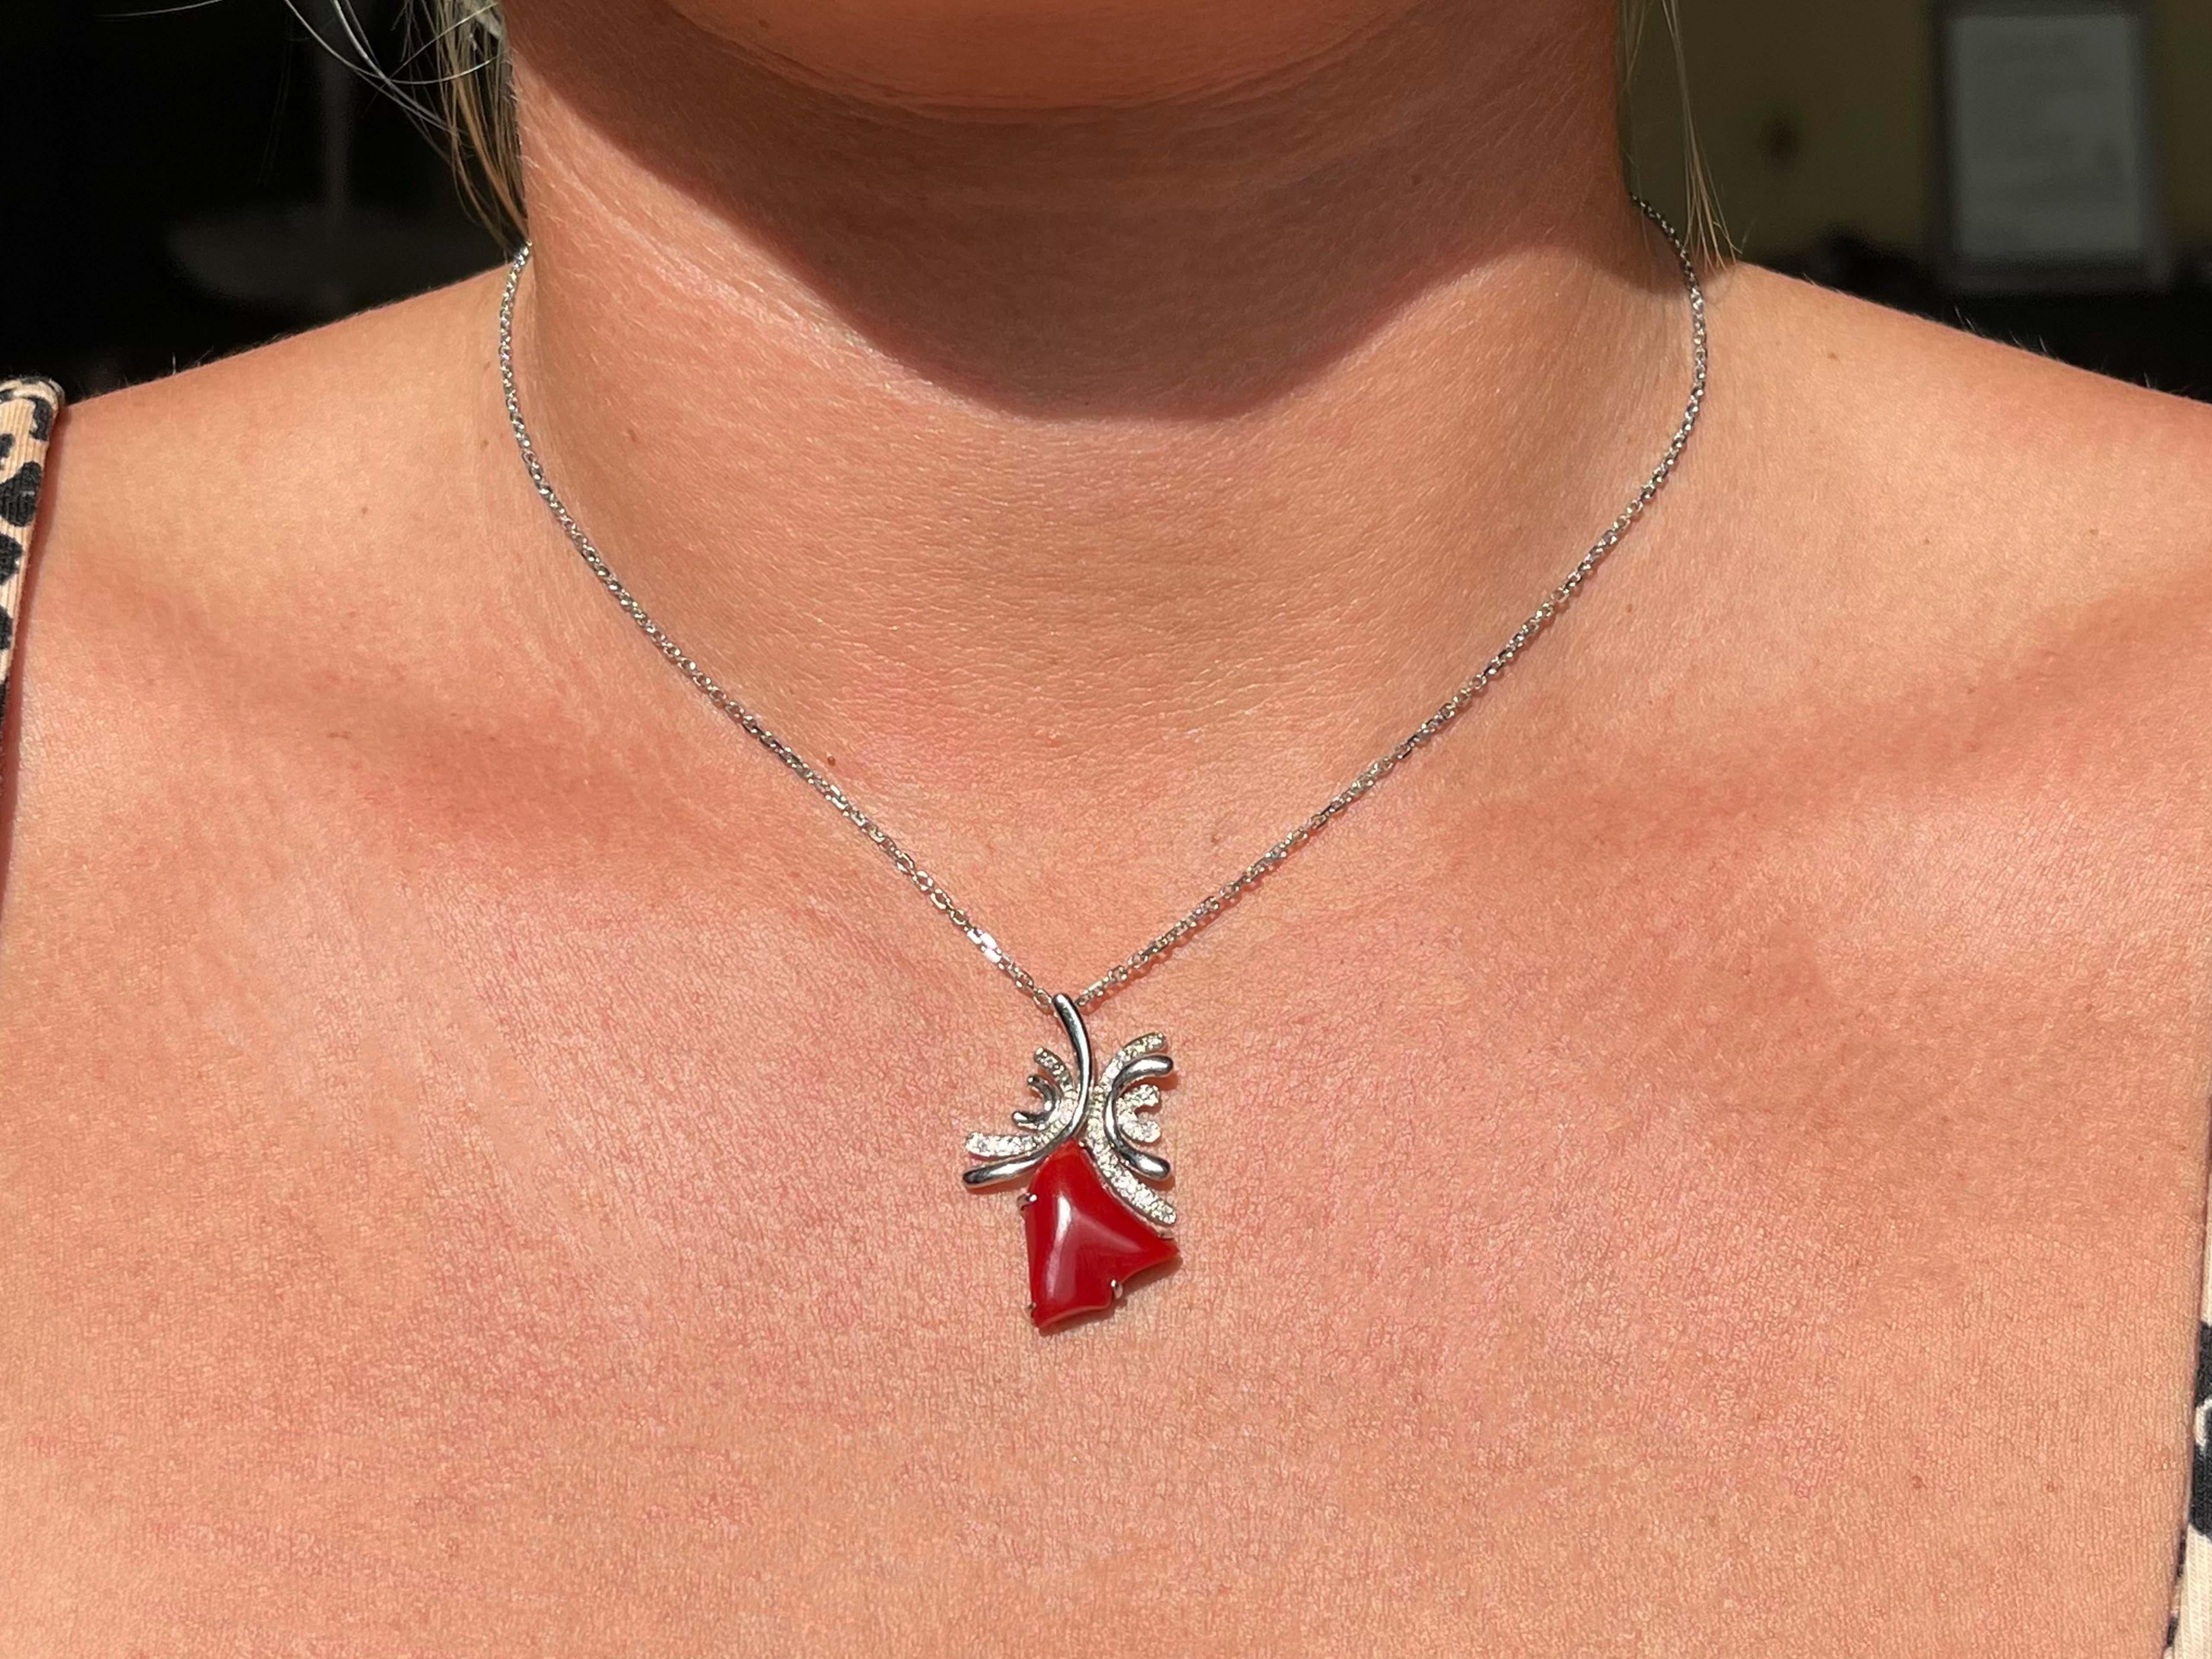 Item Specifications:

Necklace Metal: 14k  White Gold

Gemstone: aka red coral, natural not dyed

Total Weight: 6.5 Grams

Chain Length: 16